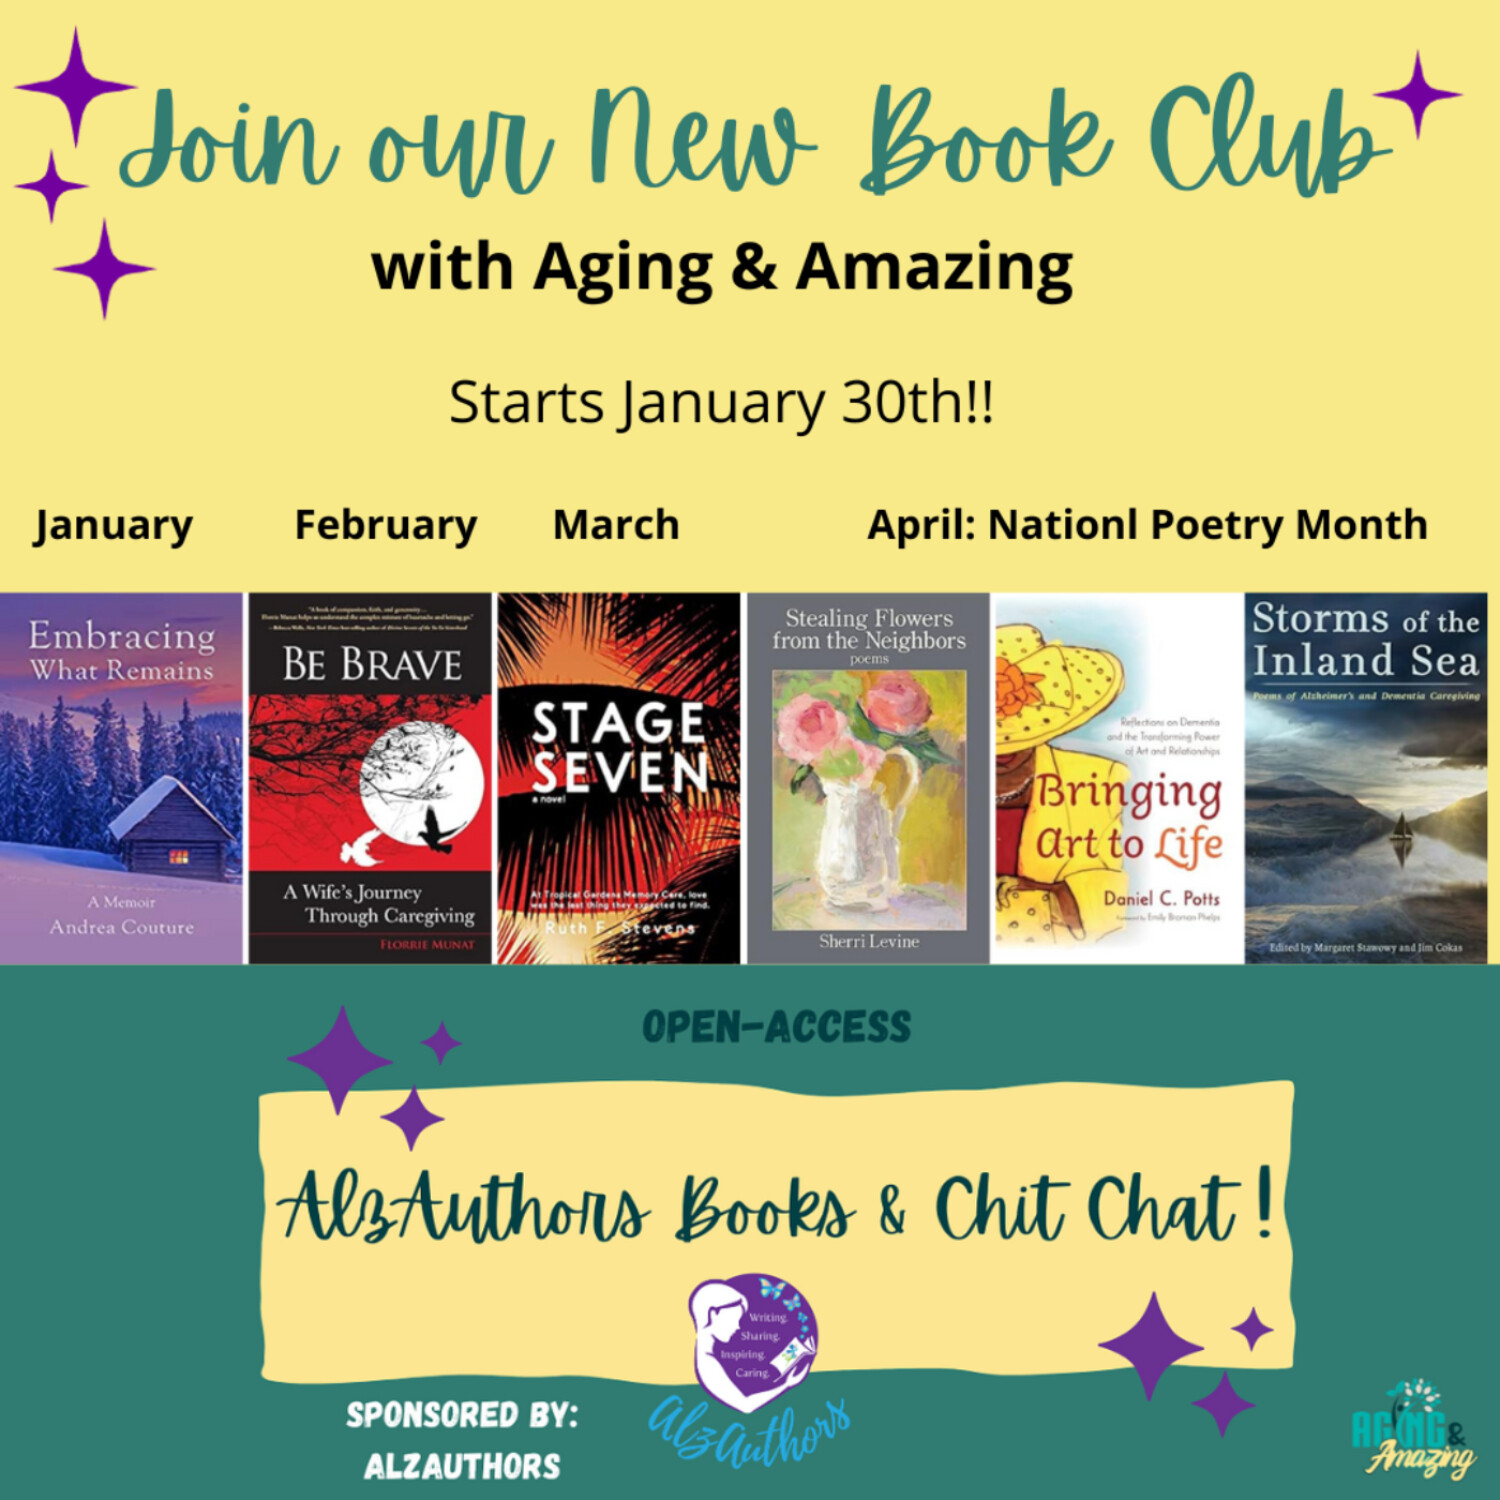 AlzAuthors Book Club Chit Chat Promo with Aging and Amazing